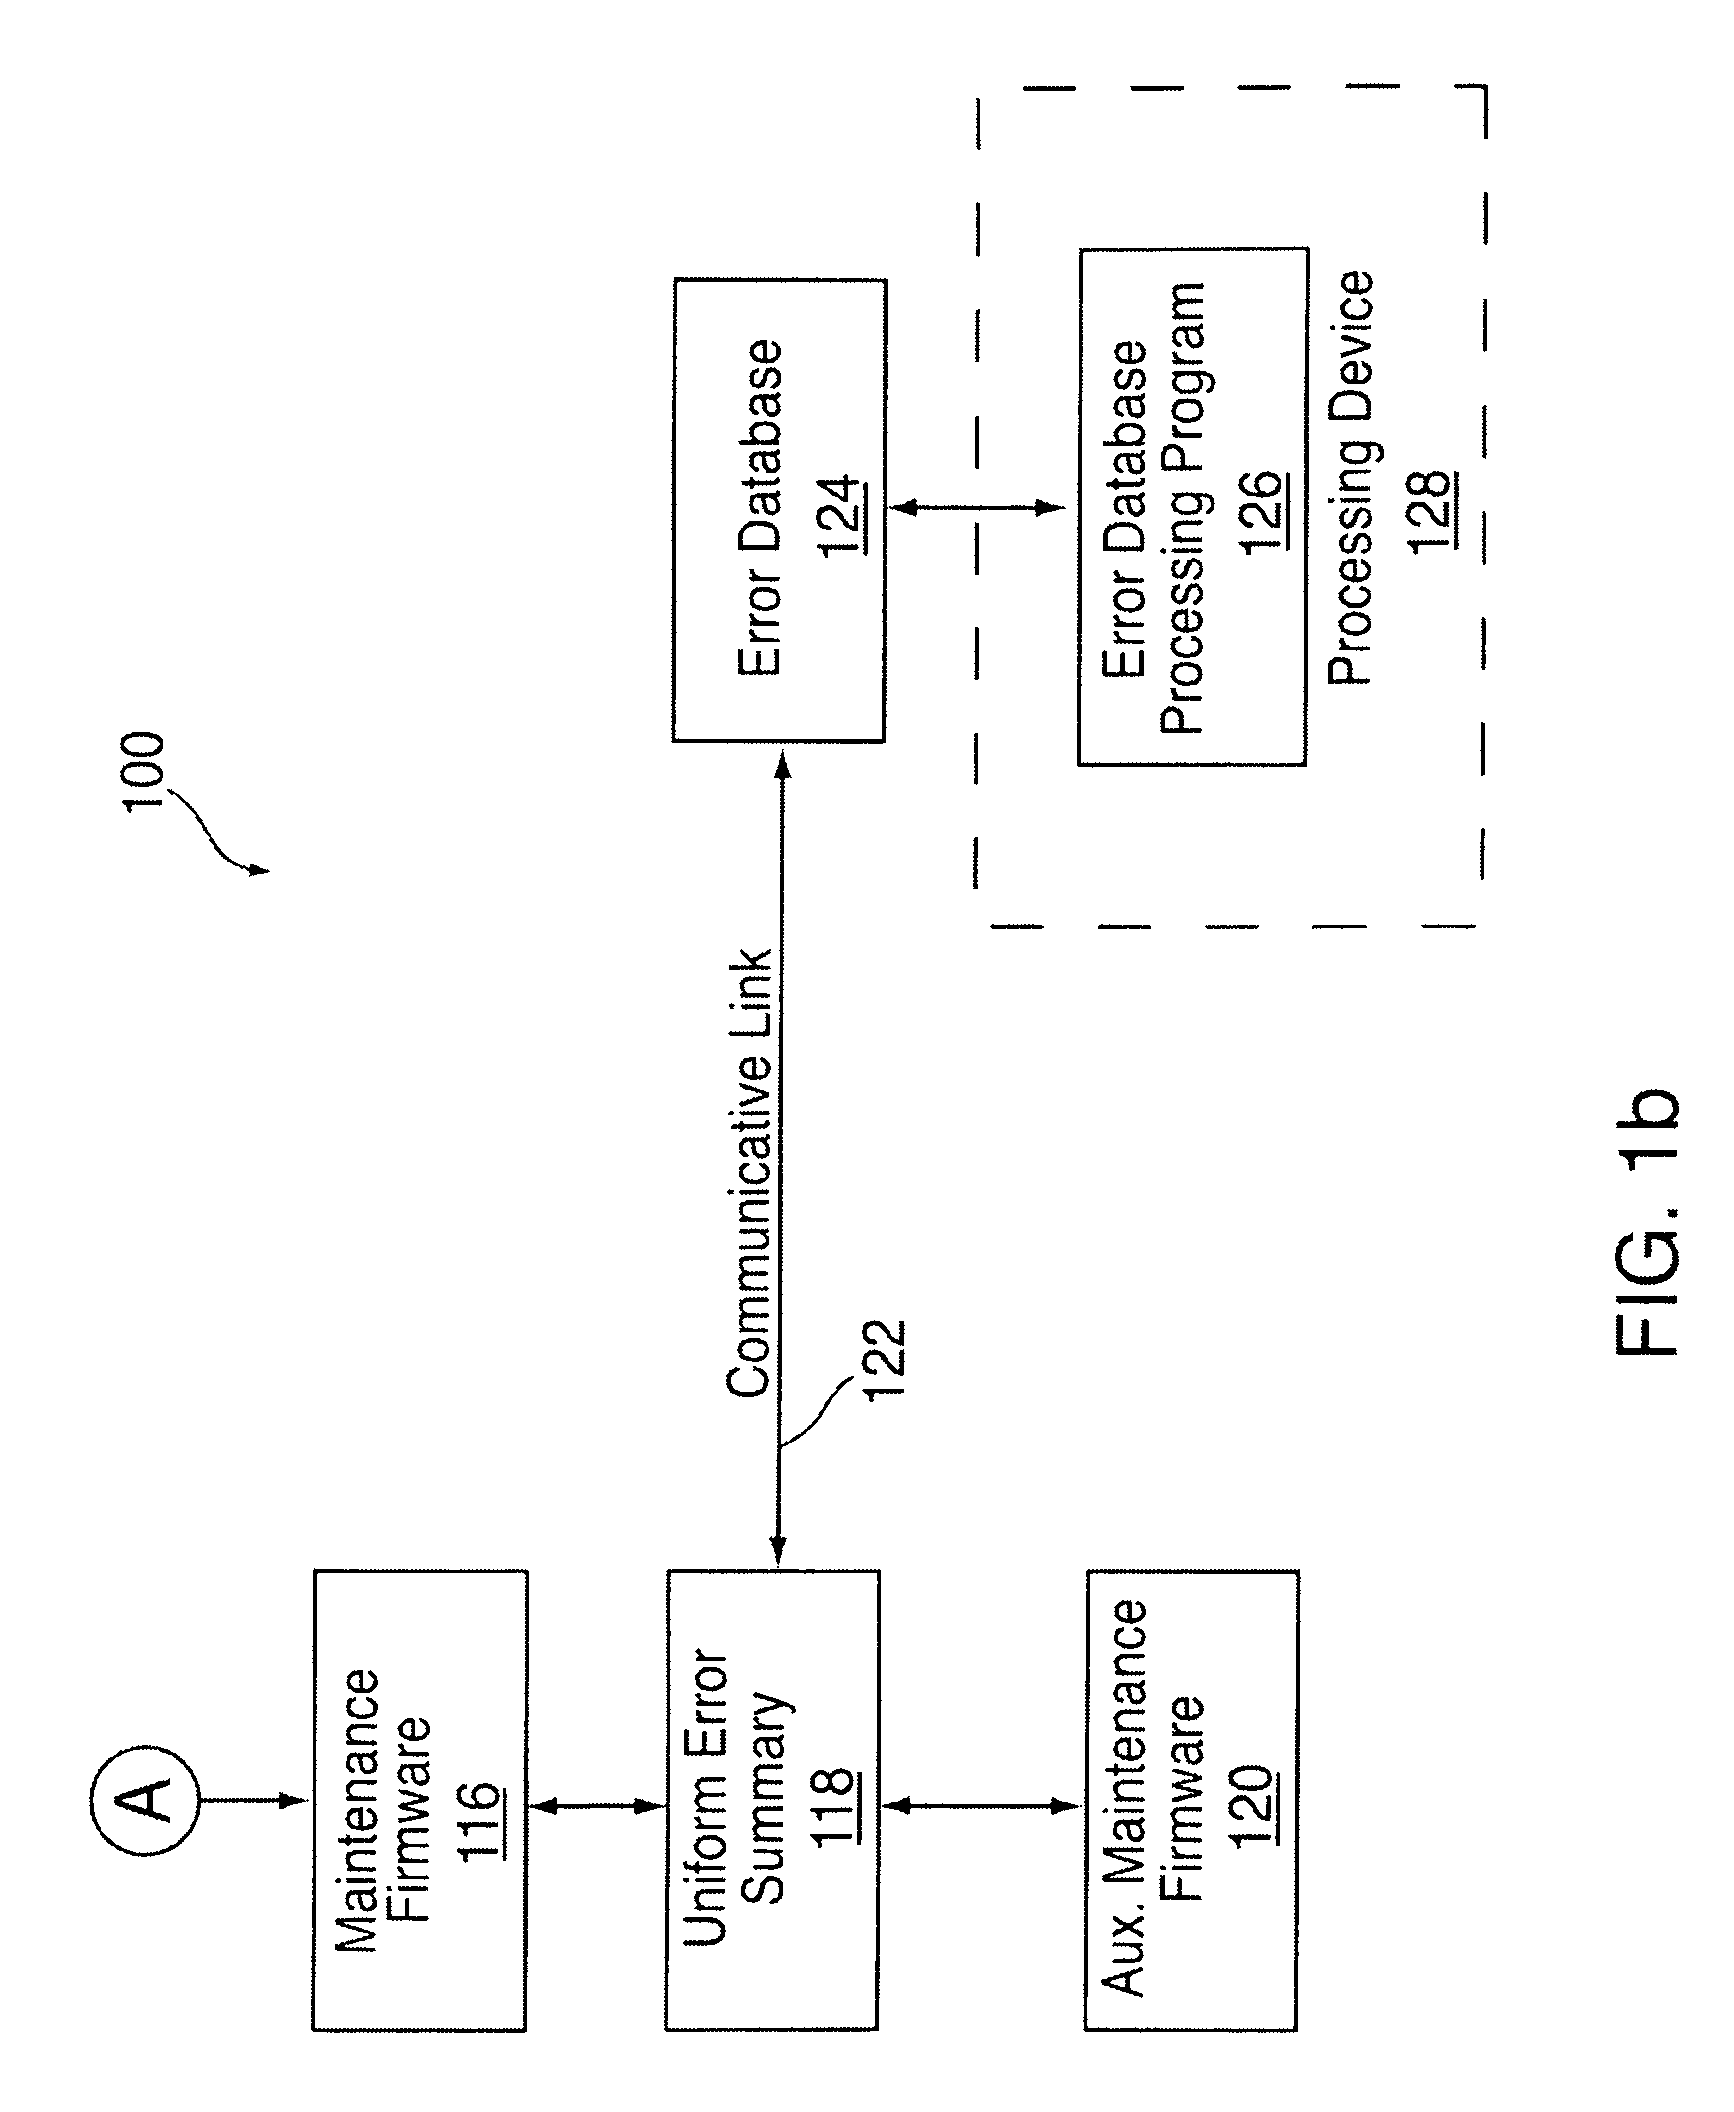 Method, system and computer program product for processing error information in a system